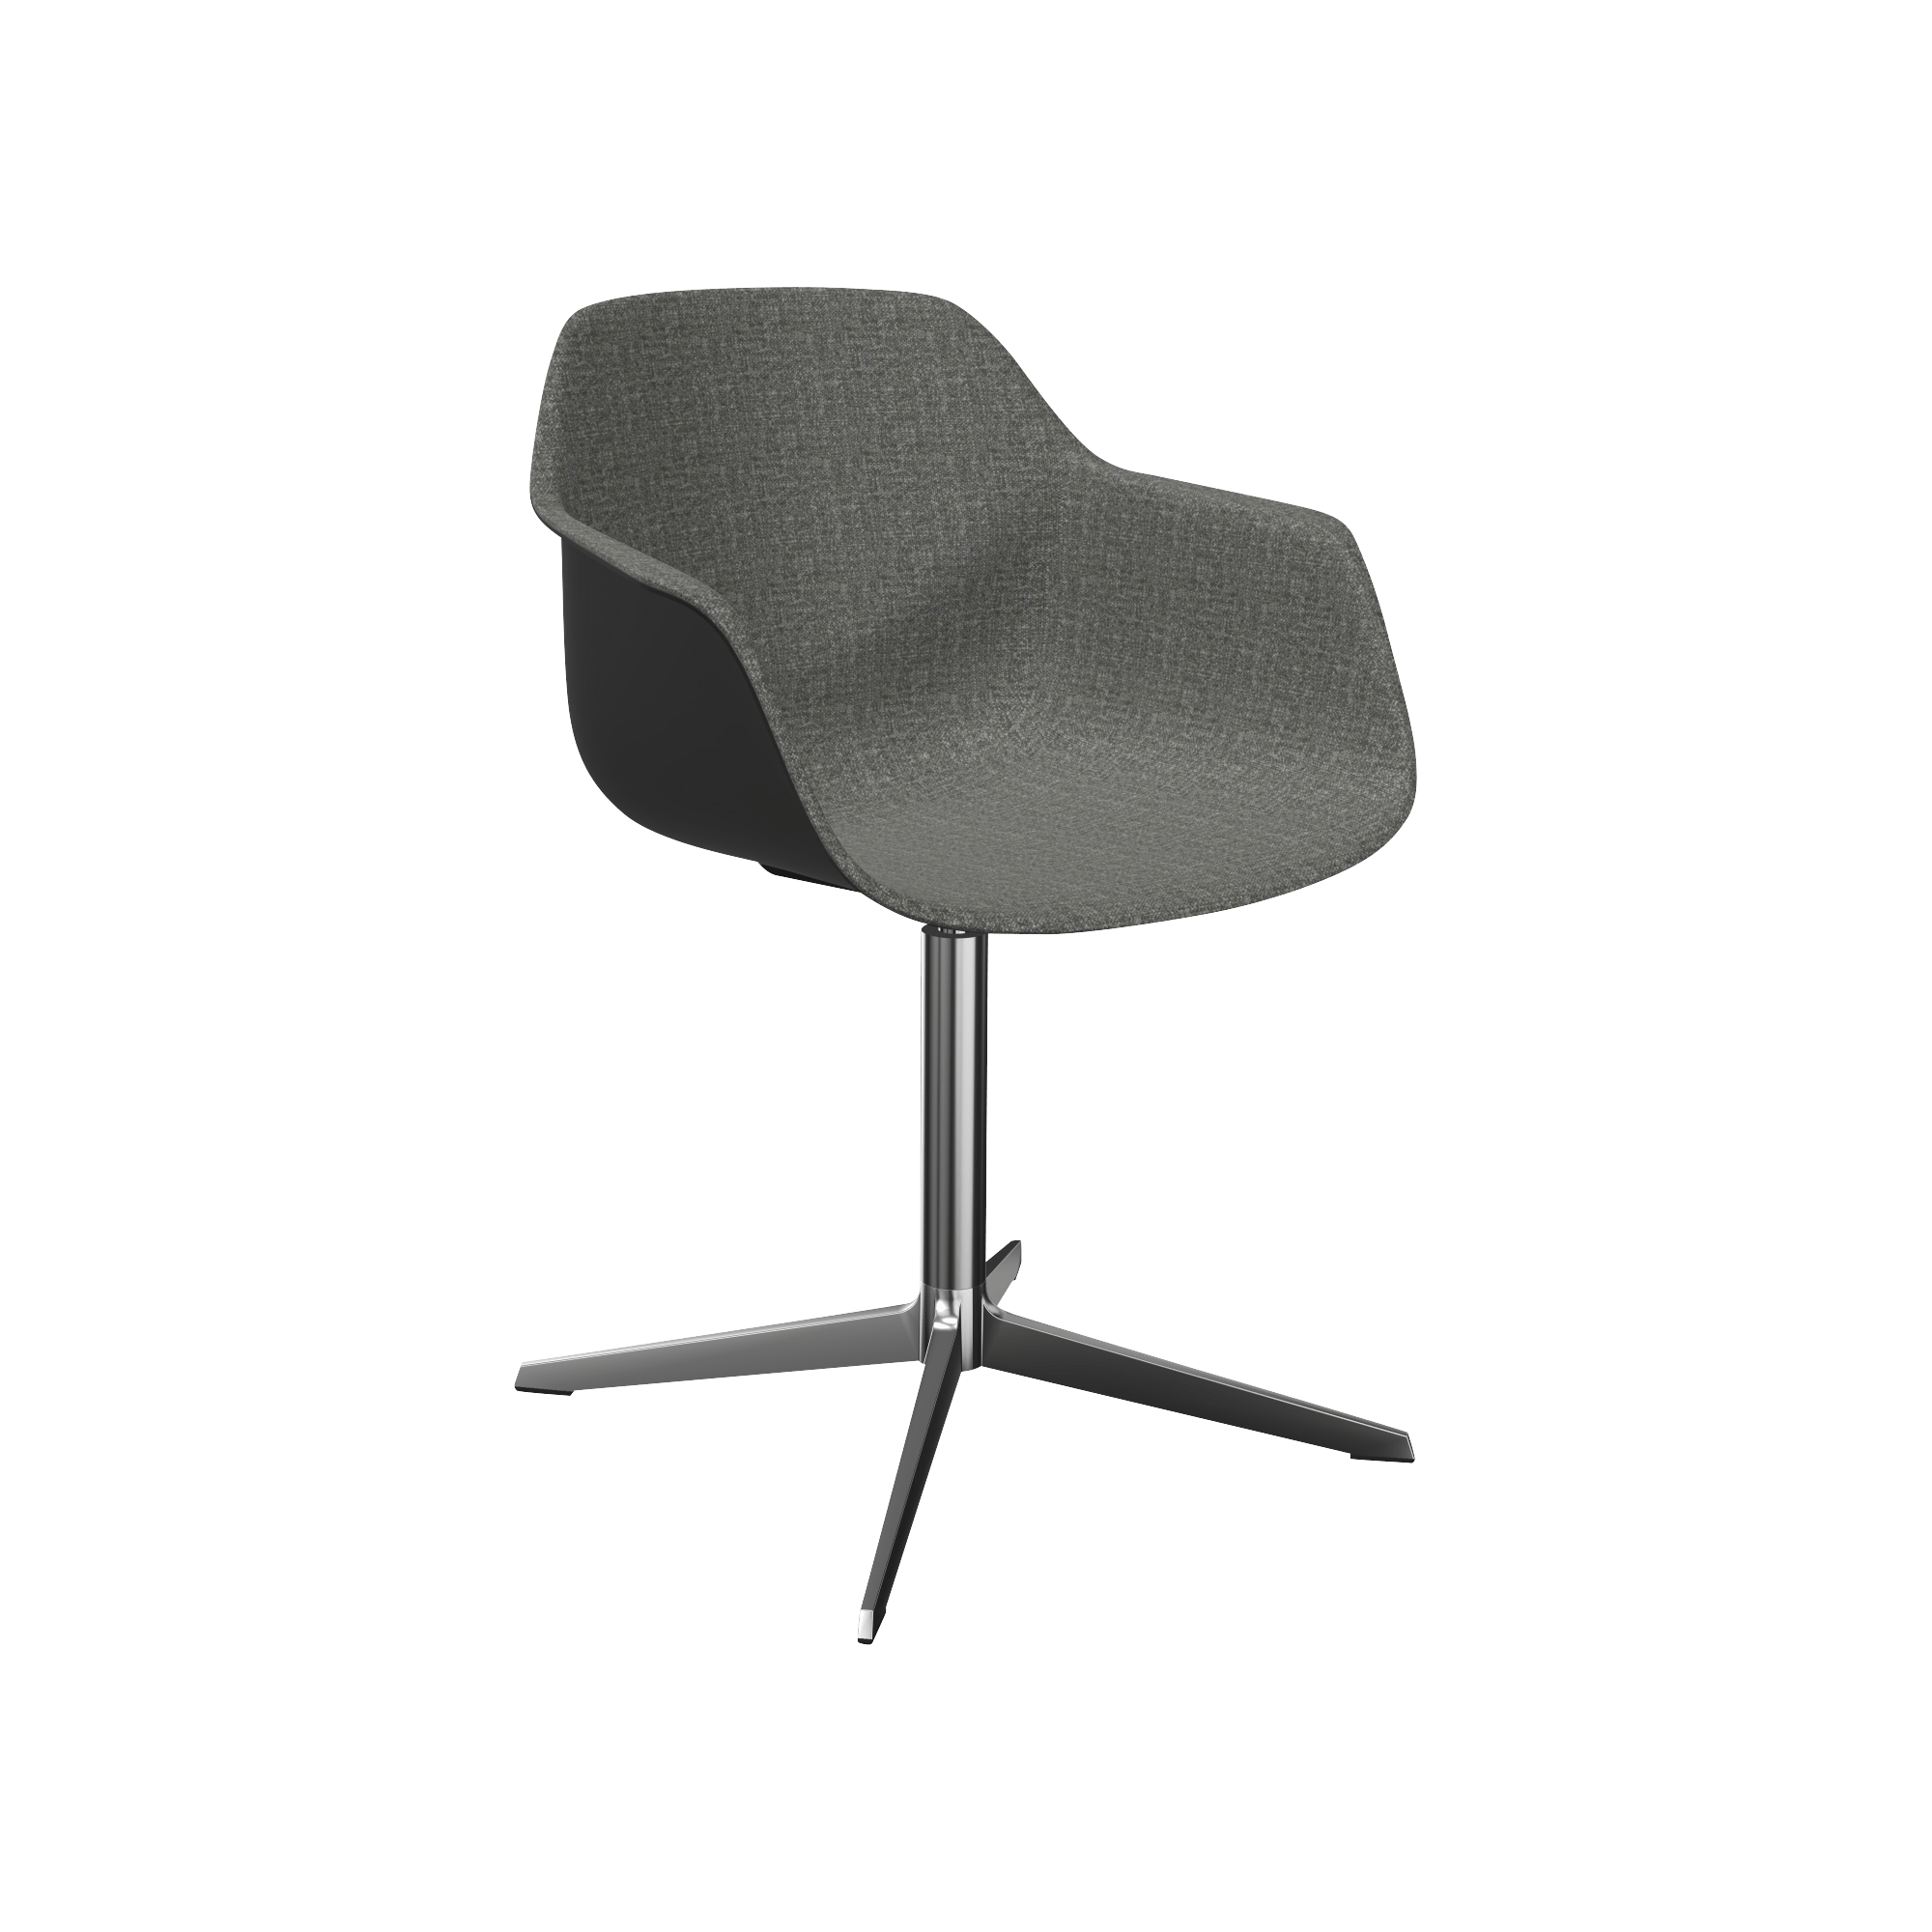 A grey upholstered chair on a metal base.